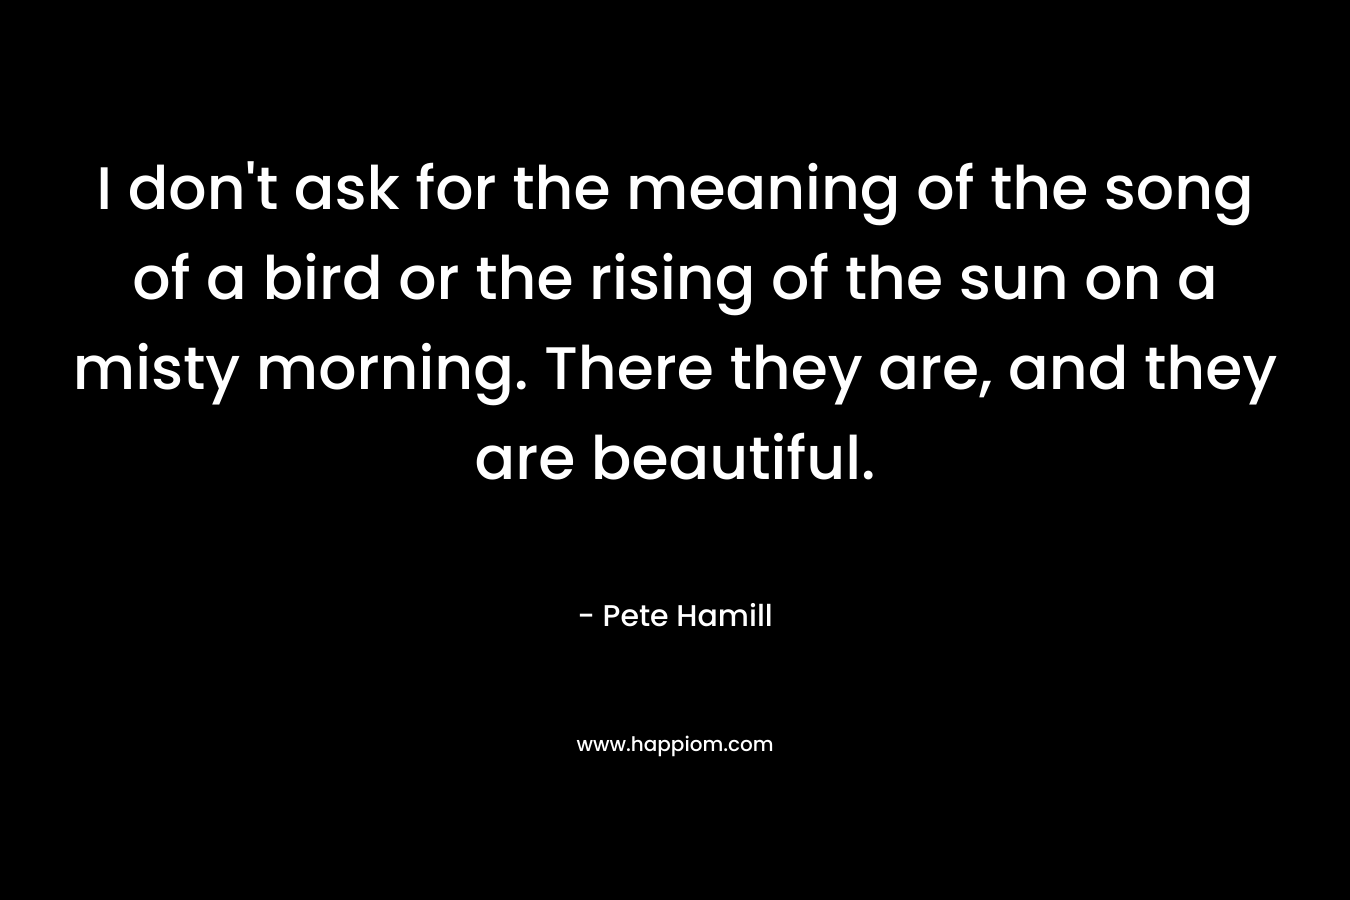 I don’t ask for the meaning of the song of a bird or the rising of the sun on a misty morning. There they are, and they are beautiful. – Pete Hamill